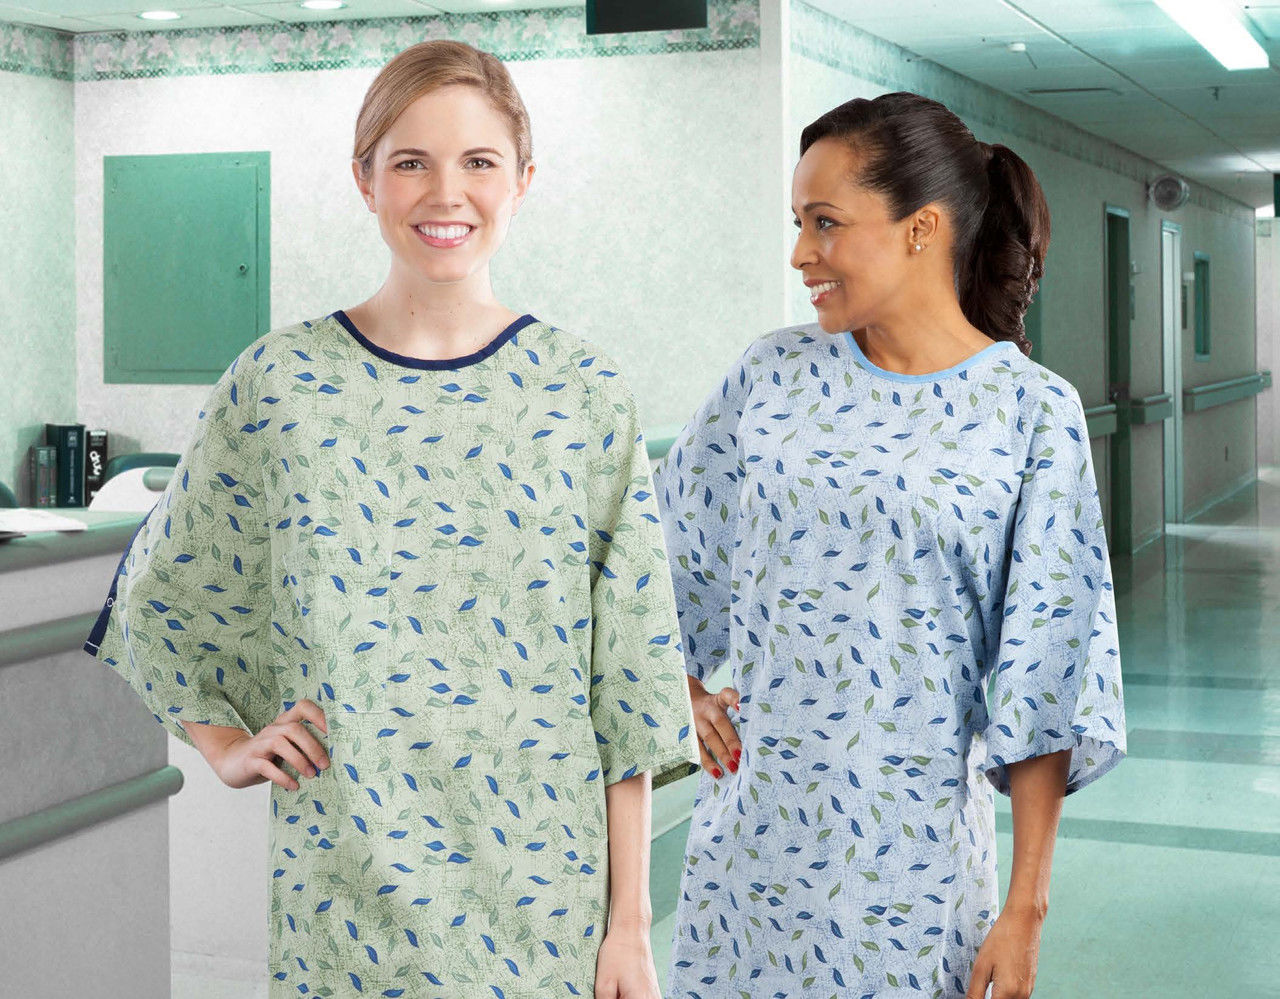 Do they throw out hospital gowns?